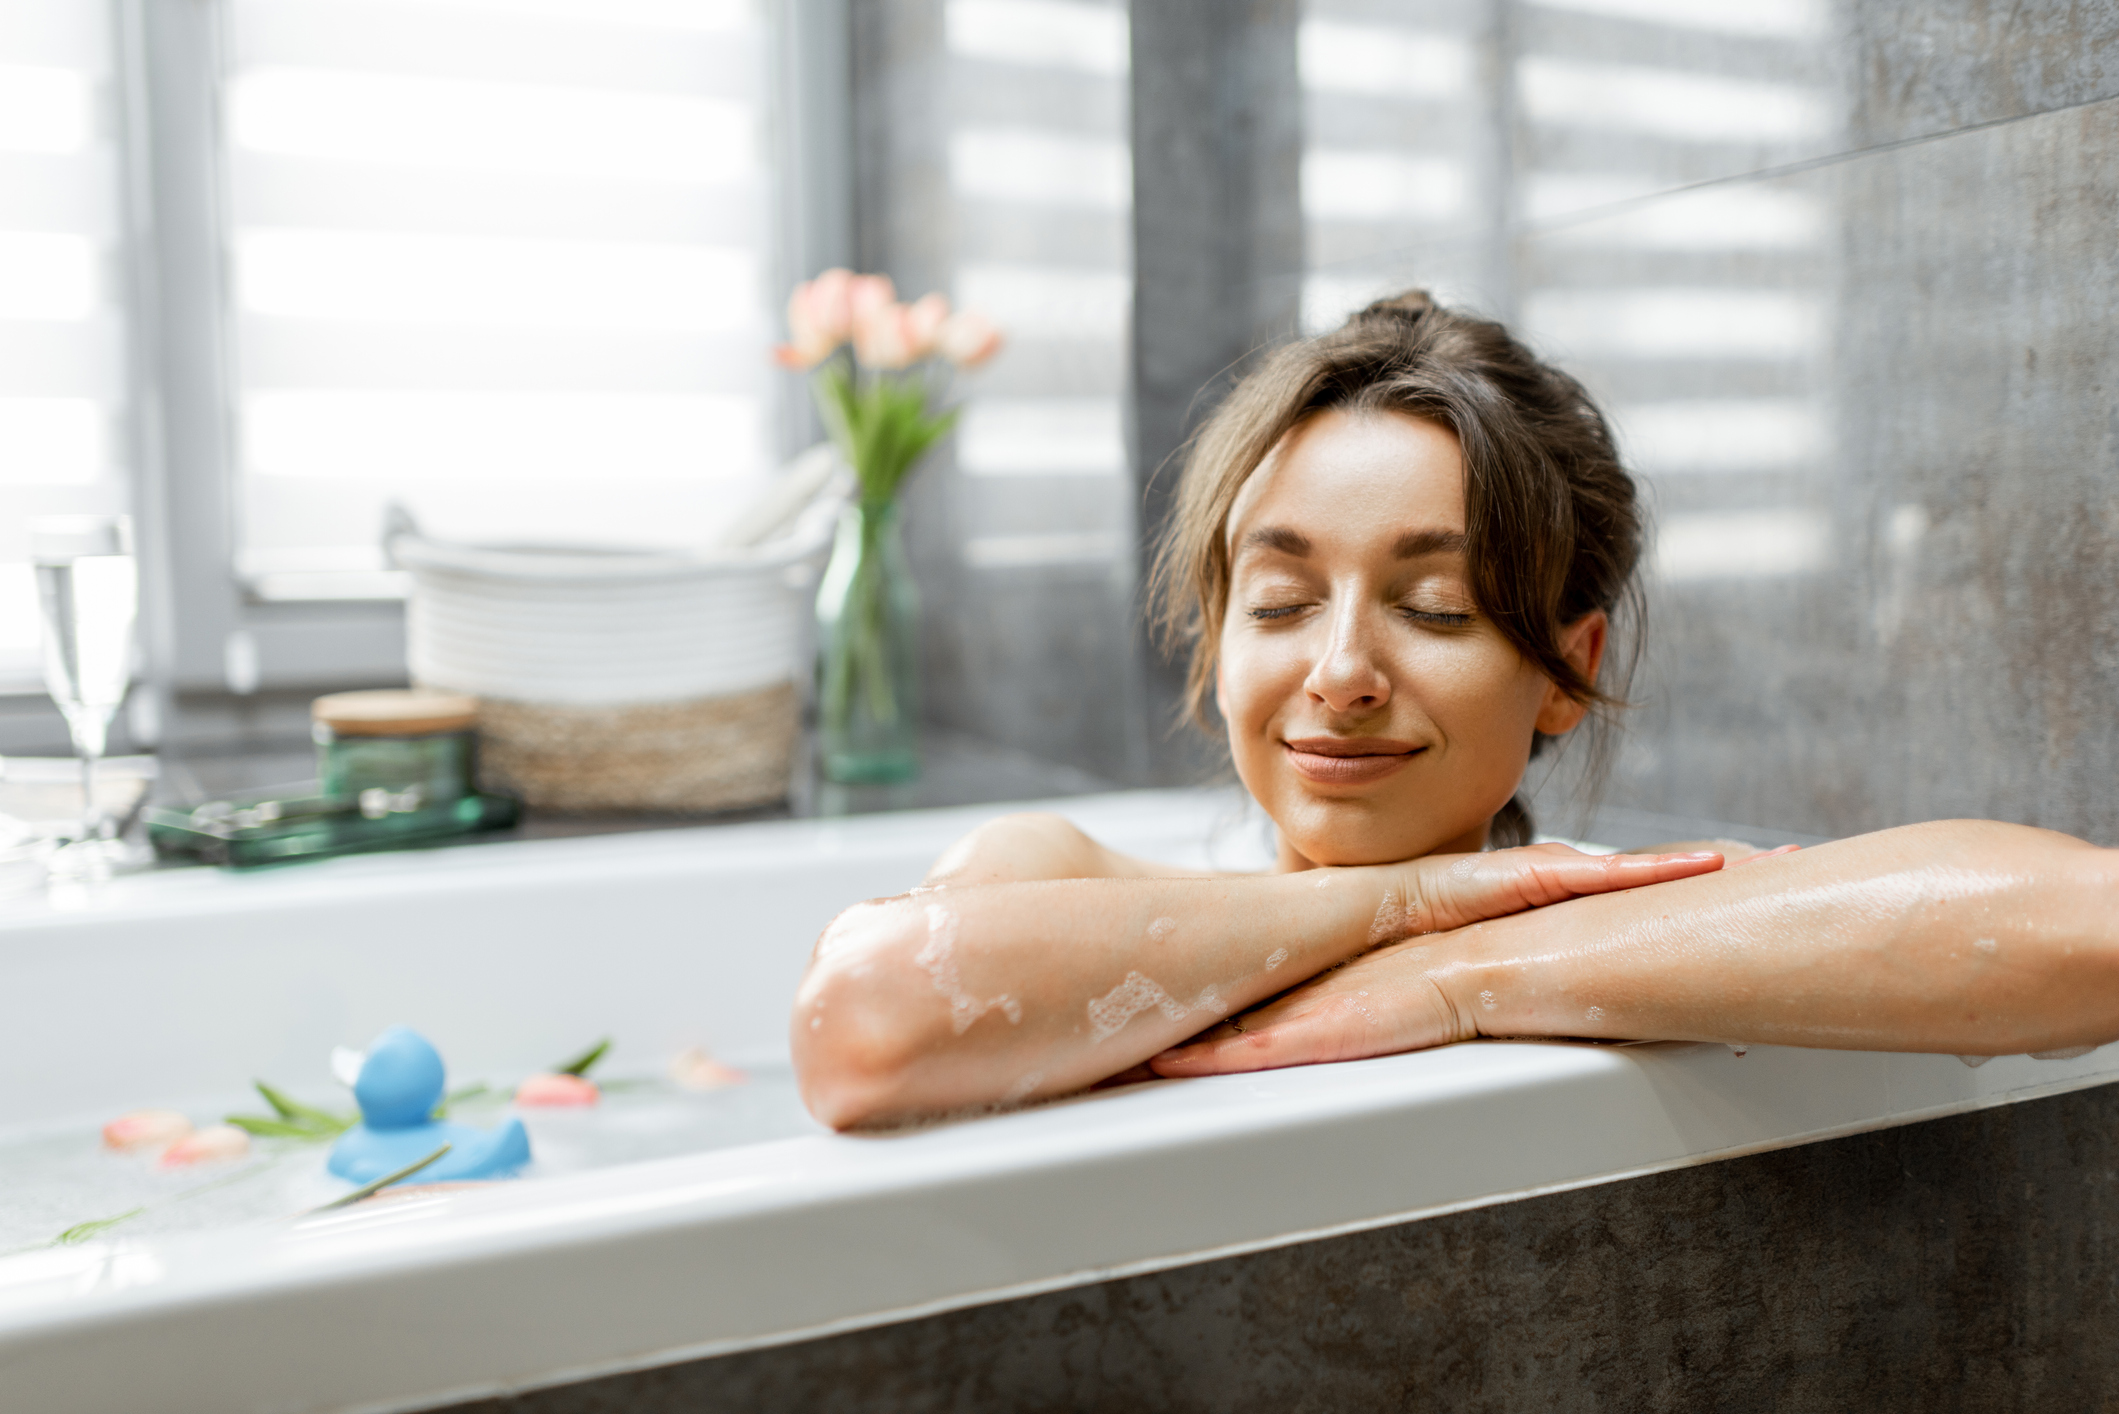 Soak away up to 28 percent of your heart disease risk